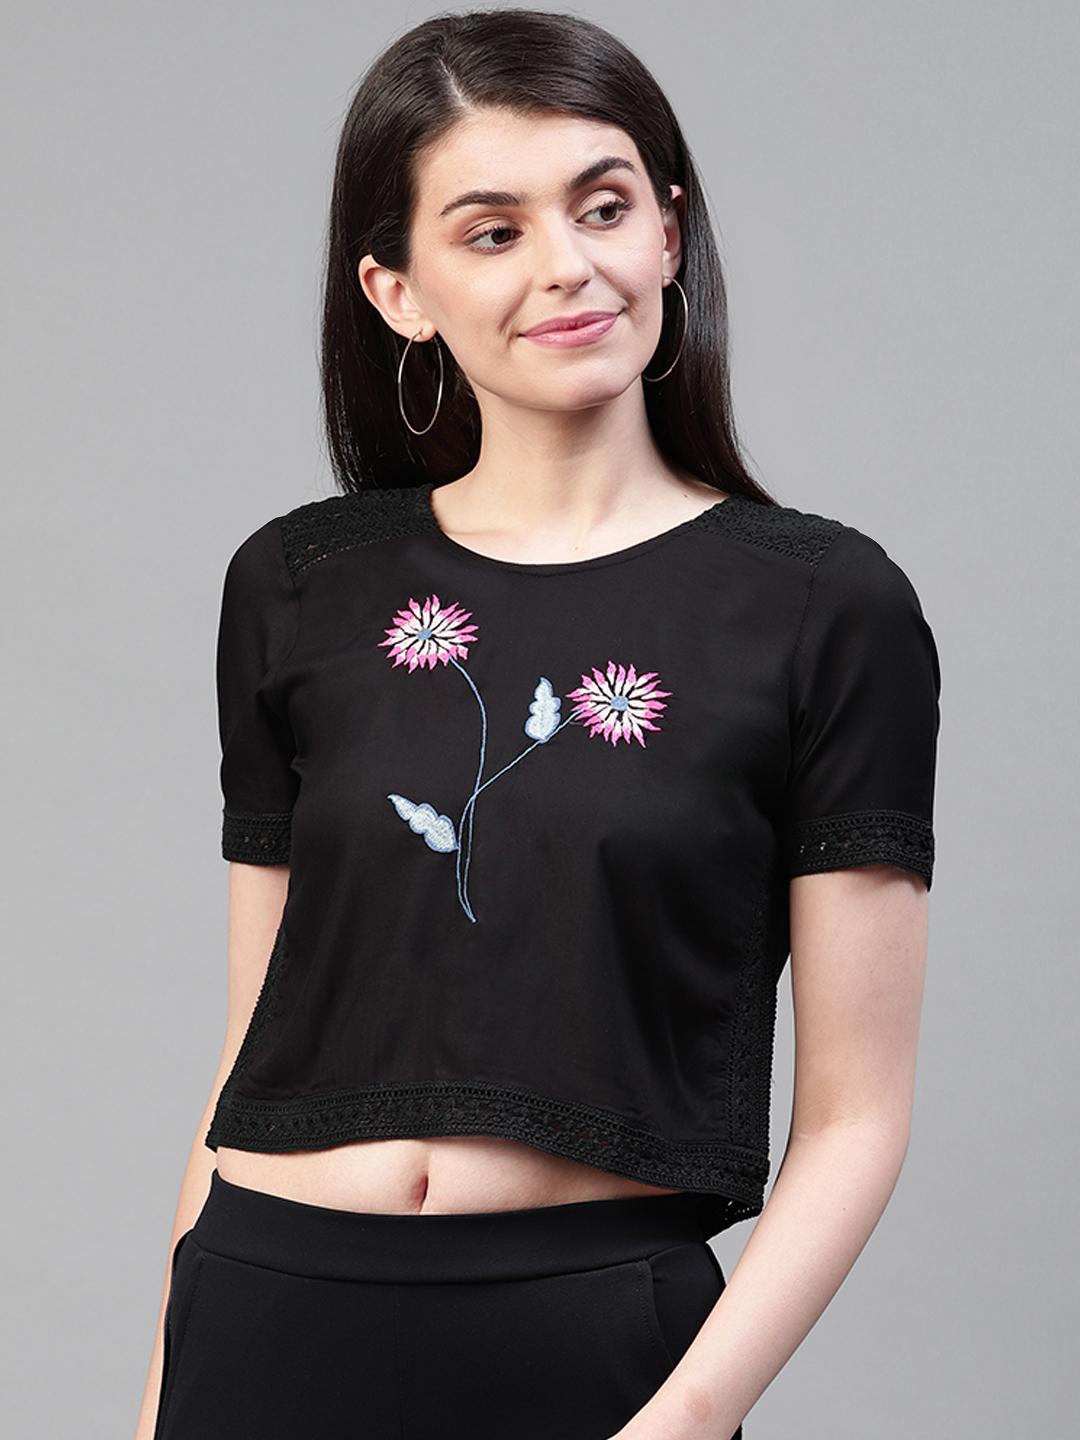 Black & Pink Floral Embroidery Top